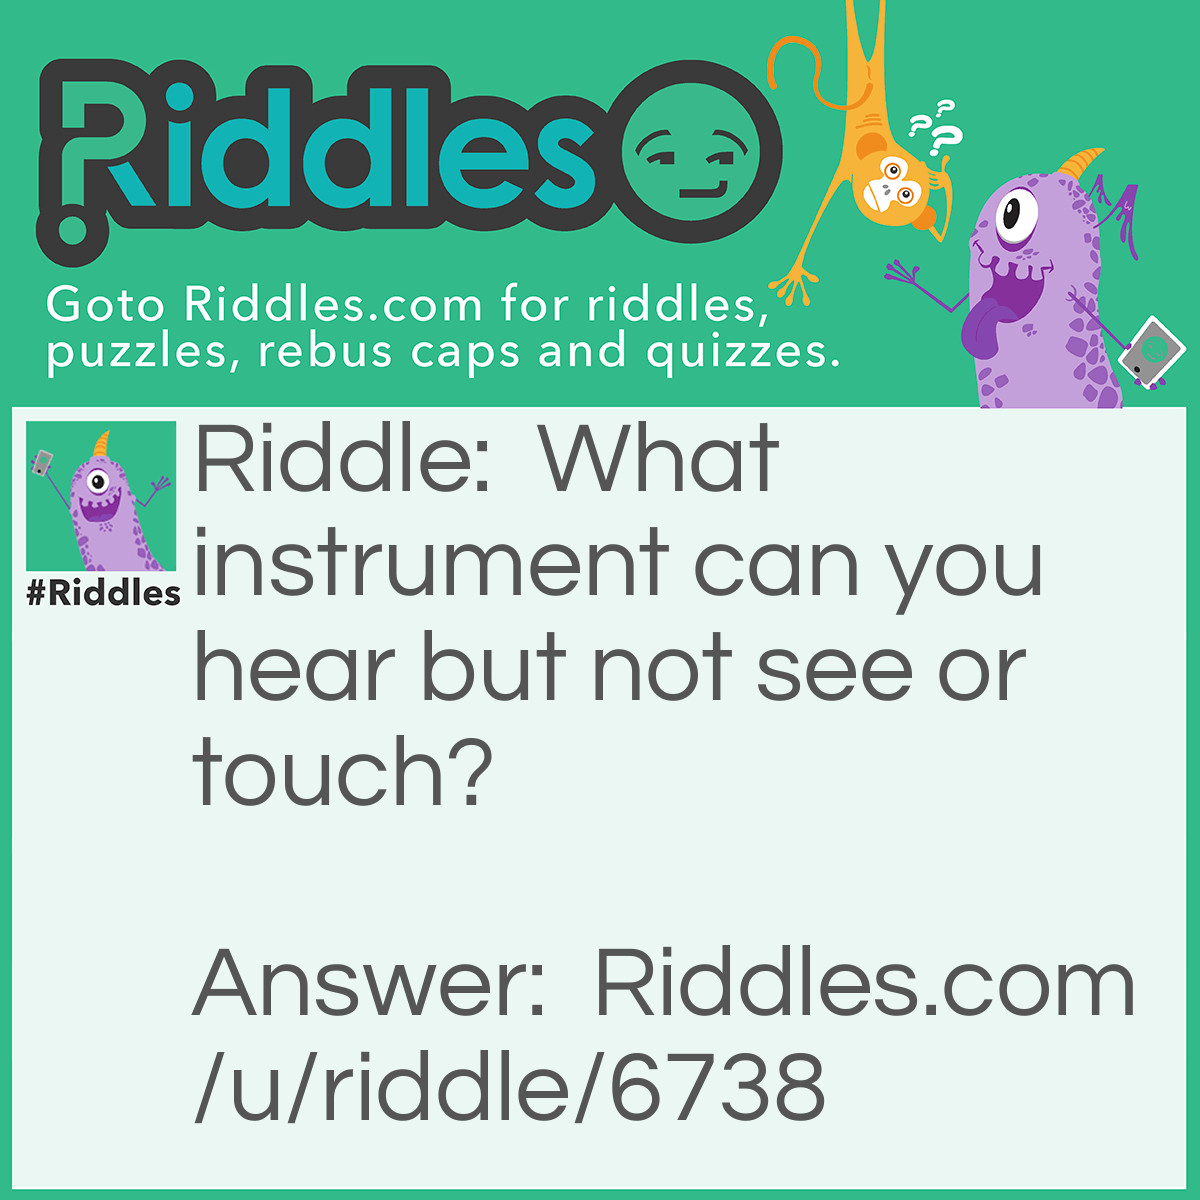 Riddle: What instrument can you hear but not see or touch? Answer: Your voice.